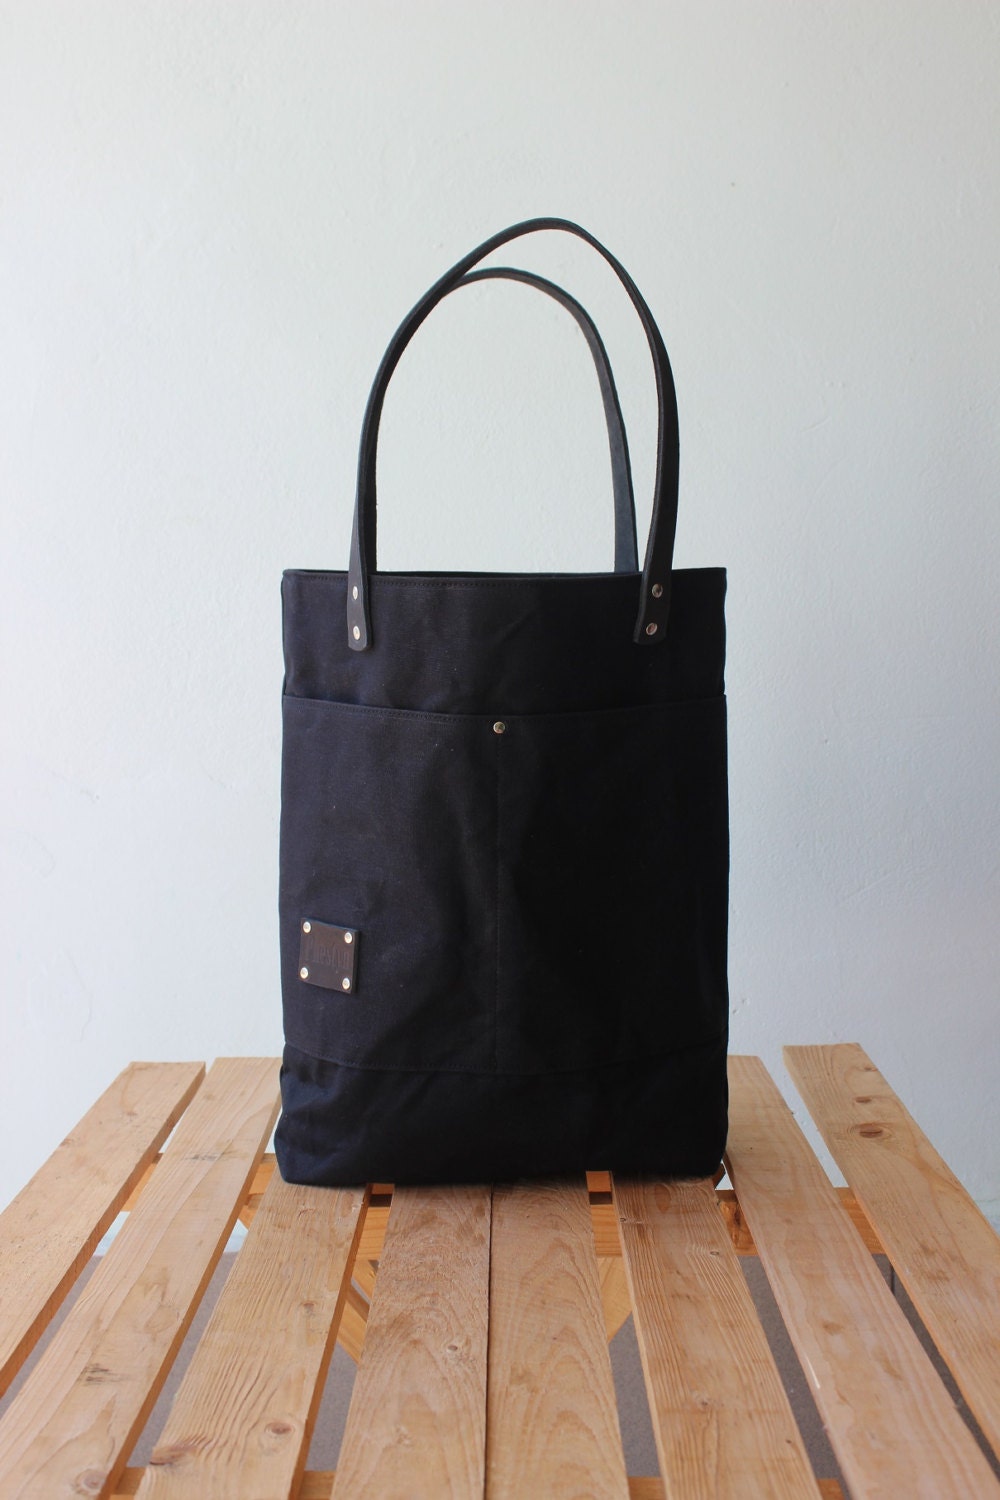 Waxed canvas Tote bag with black leather details shopper bag